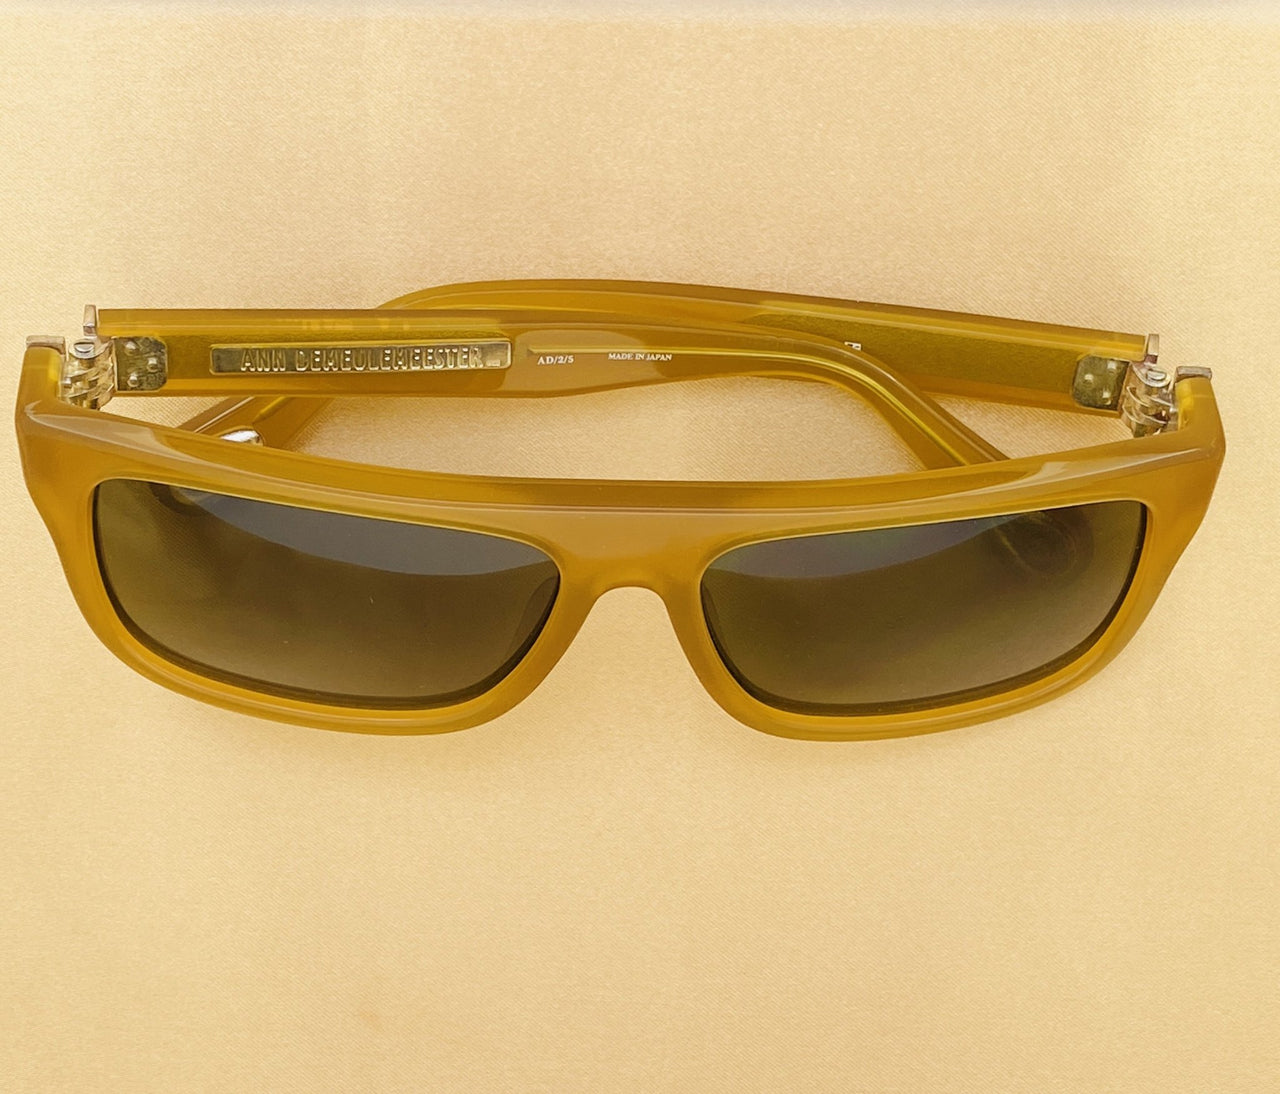 Ann Demeulemeester Sunglasses Flat Top Honey Orange 925 Silver with Green Lenses CAT 3 AD2C5SUN - Watches & Crystals